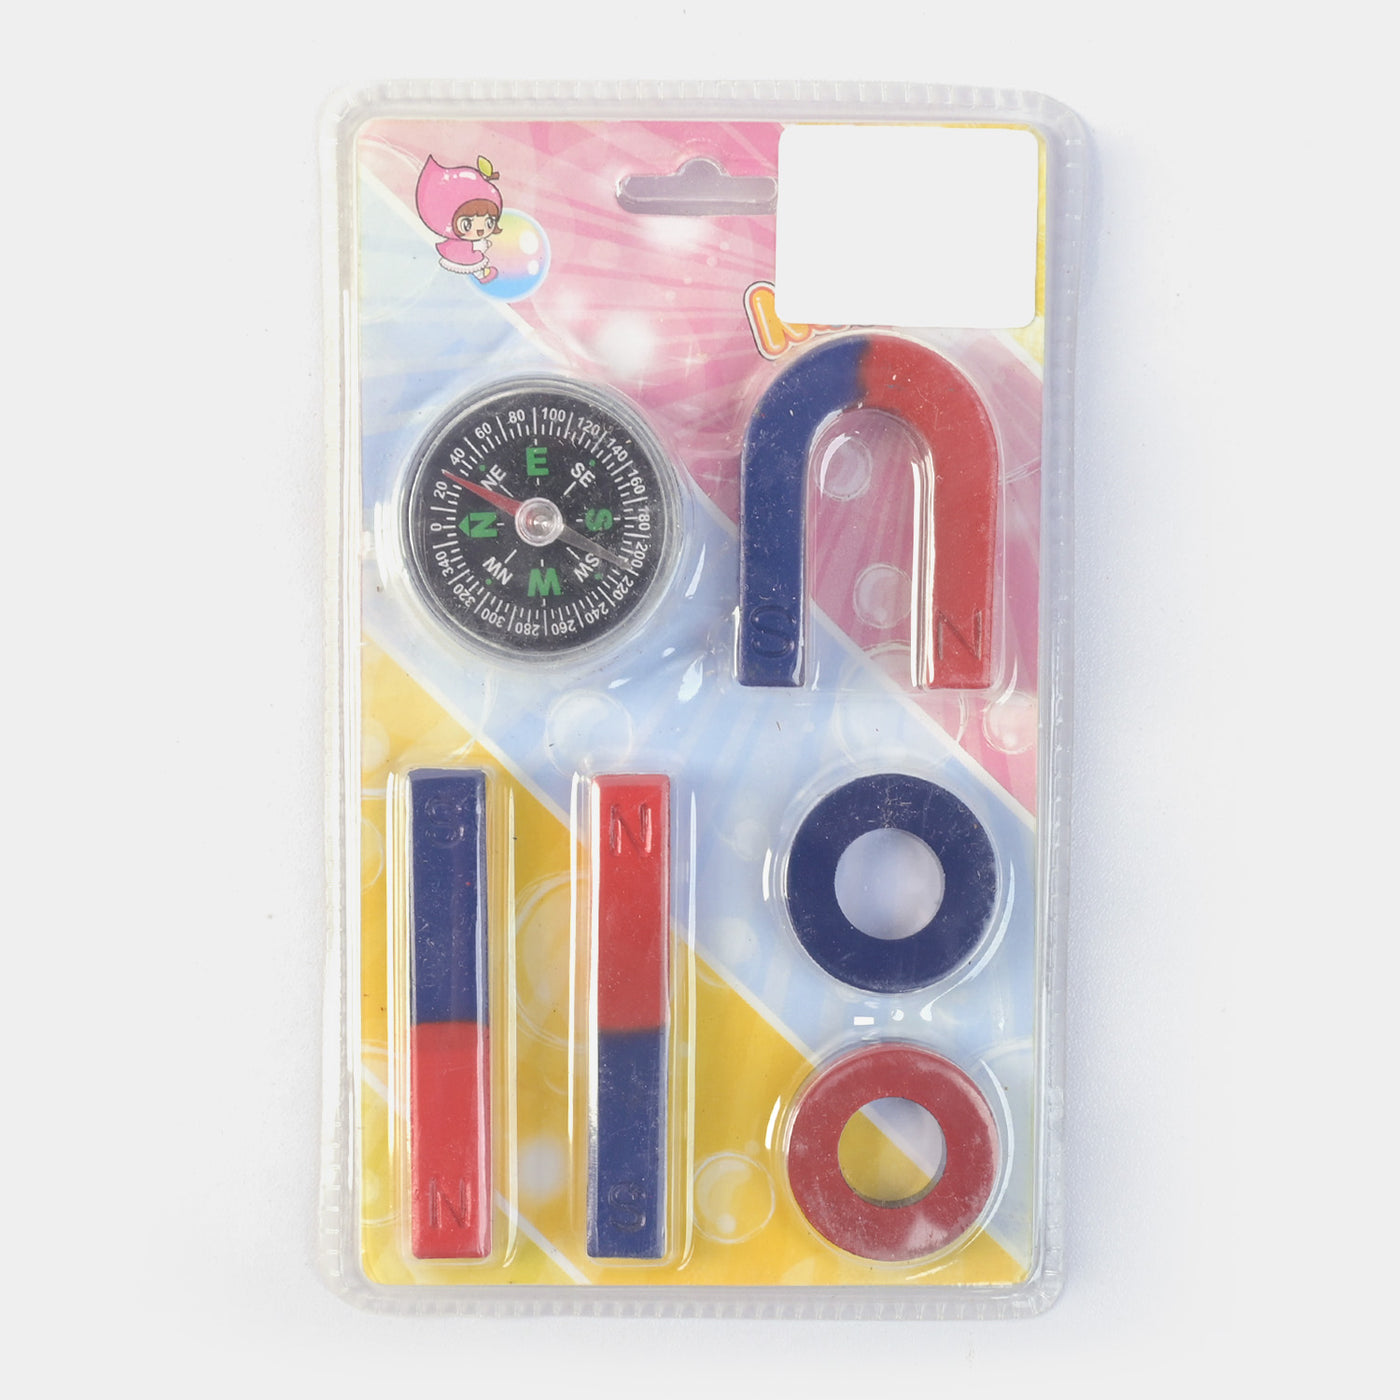 Magnet Playing Set With Compass - 6 Pcs